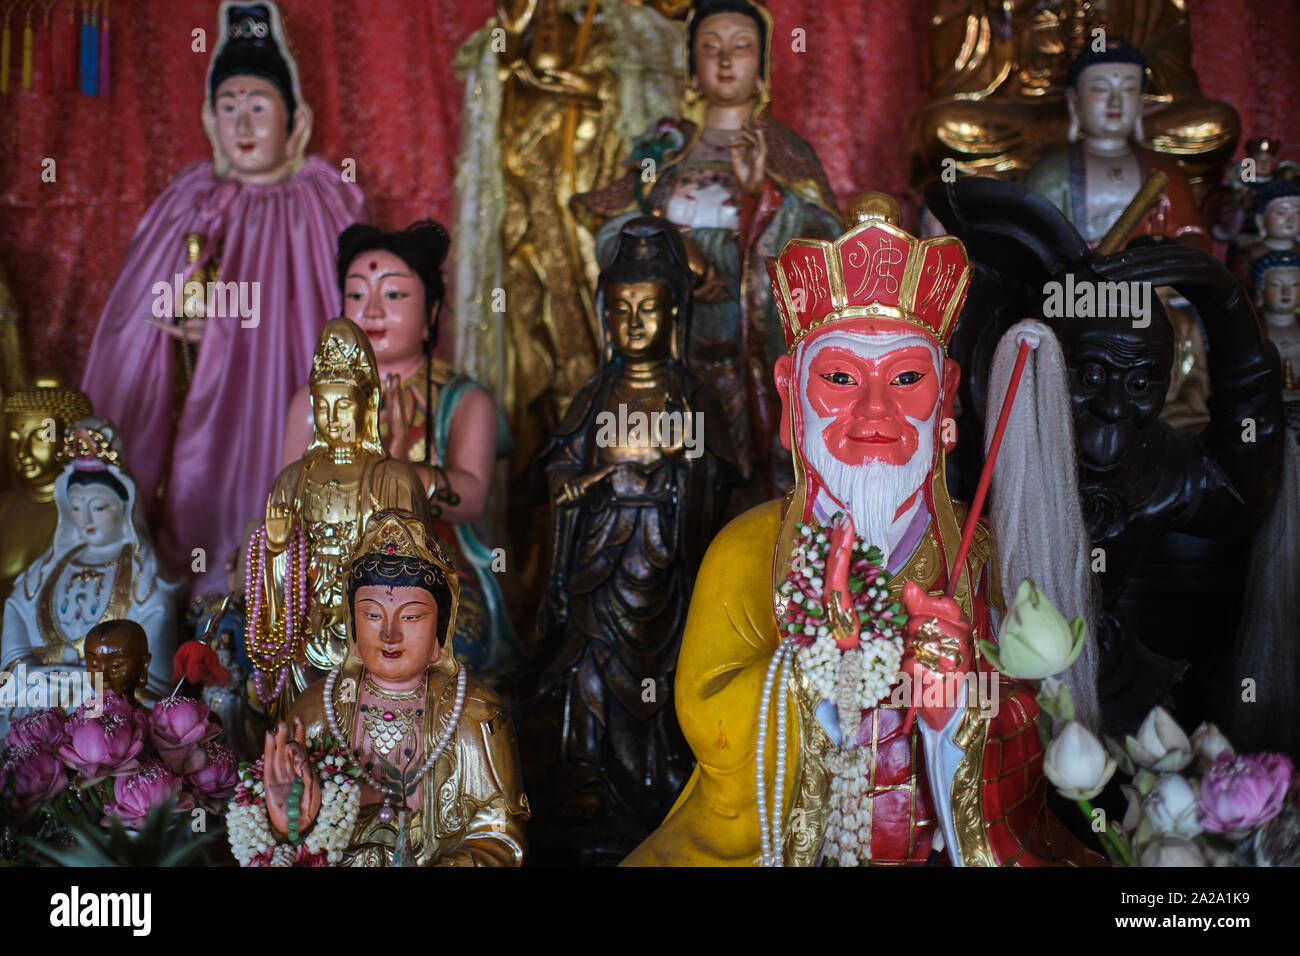 A statue of the Chinese Monkey King or Sun Wukong surrounded by other   mythological figures, at a shrine in Pud Jor Temple, Phuket Town, Thailand Stock Photo